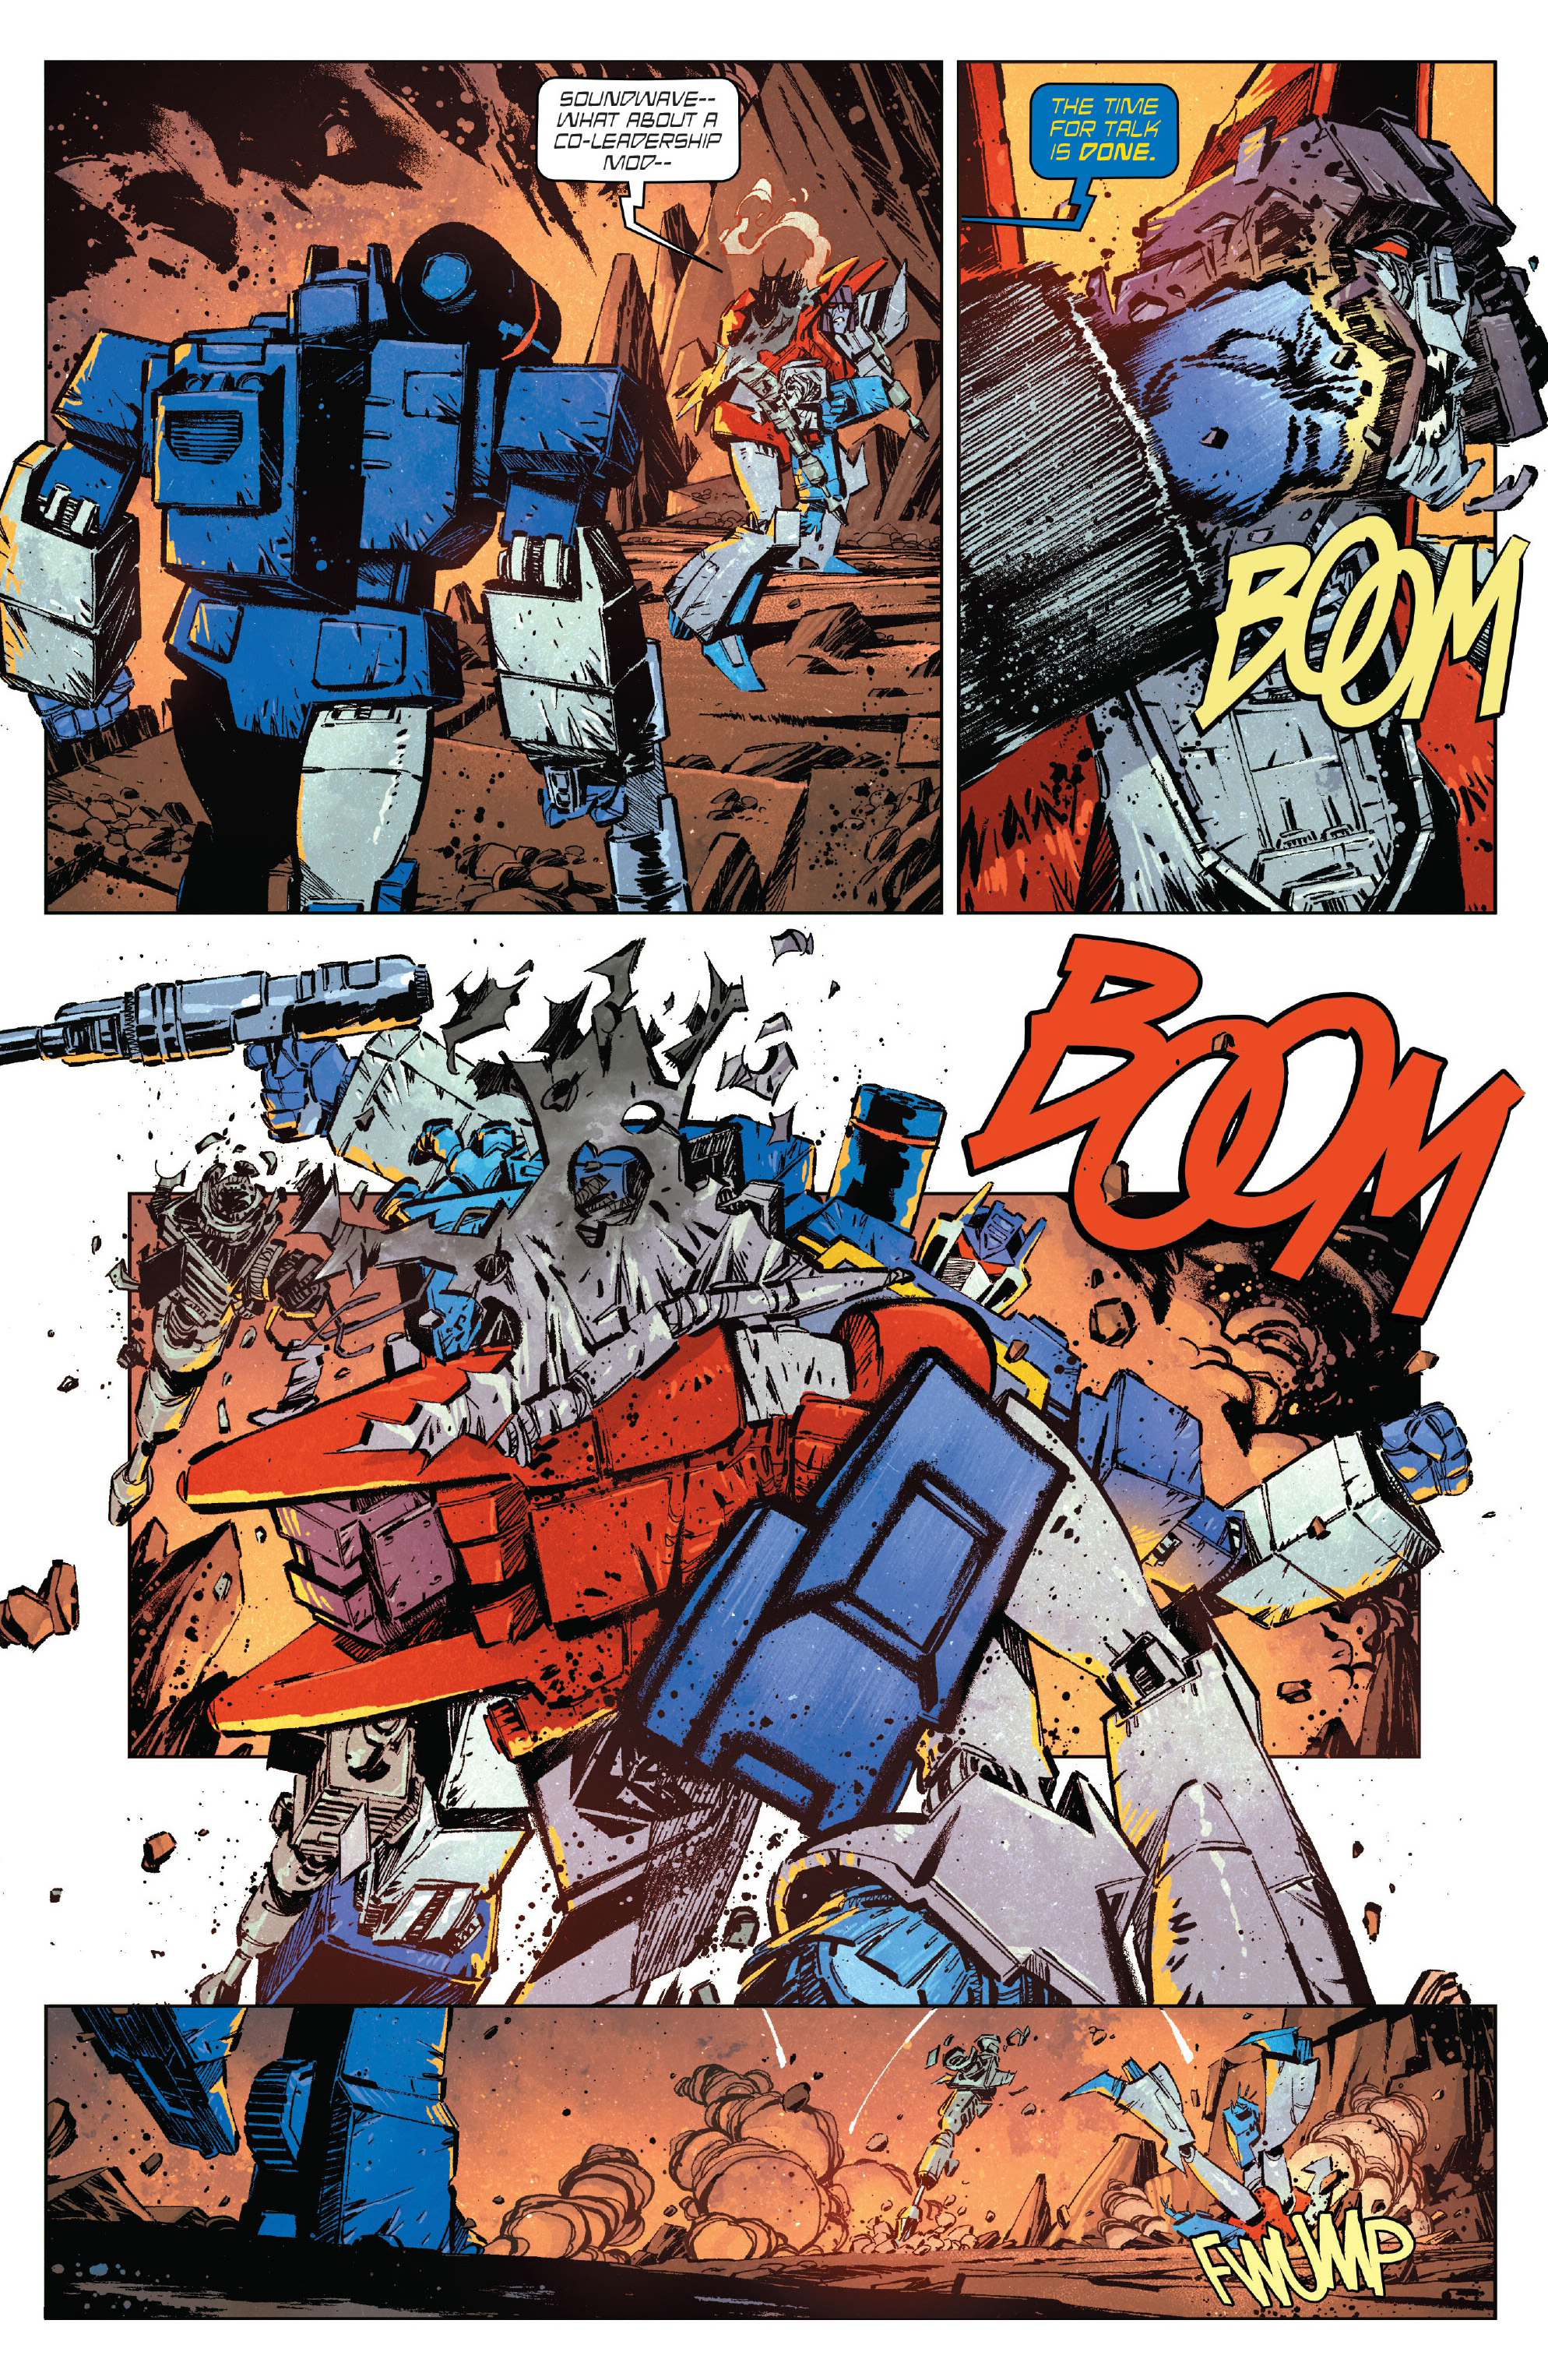 Art from Transformers #7